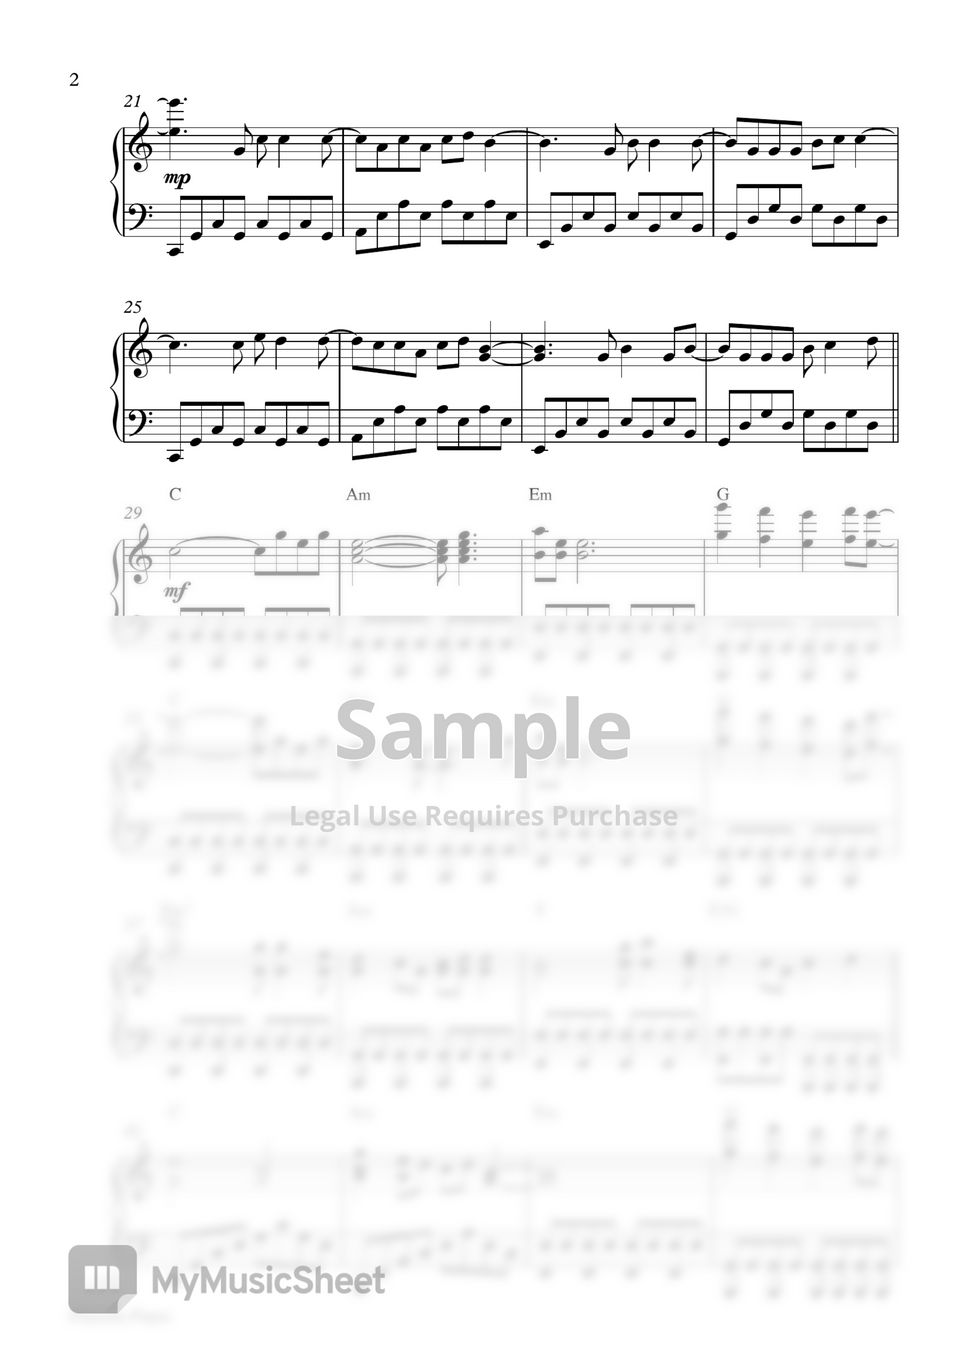 The Weeknd - Save Your Tears (Piano Sheet) by Pianella Piano